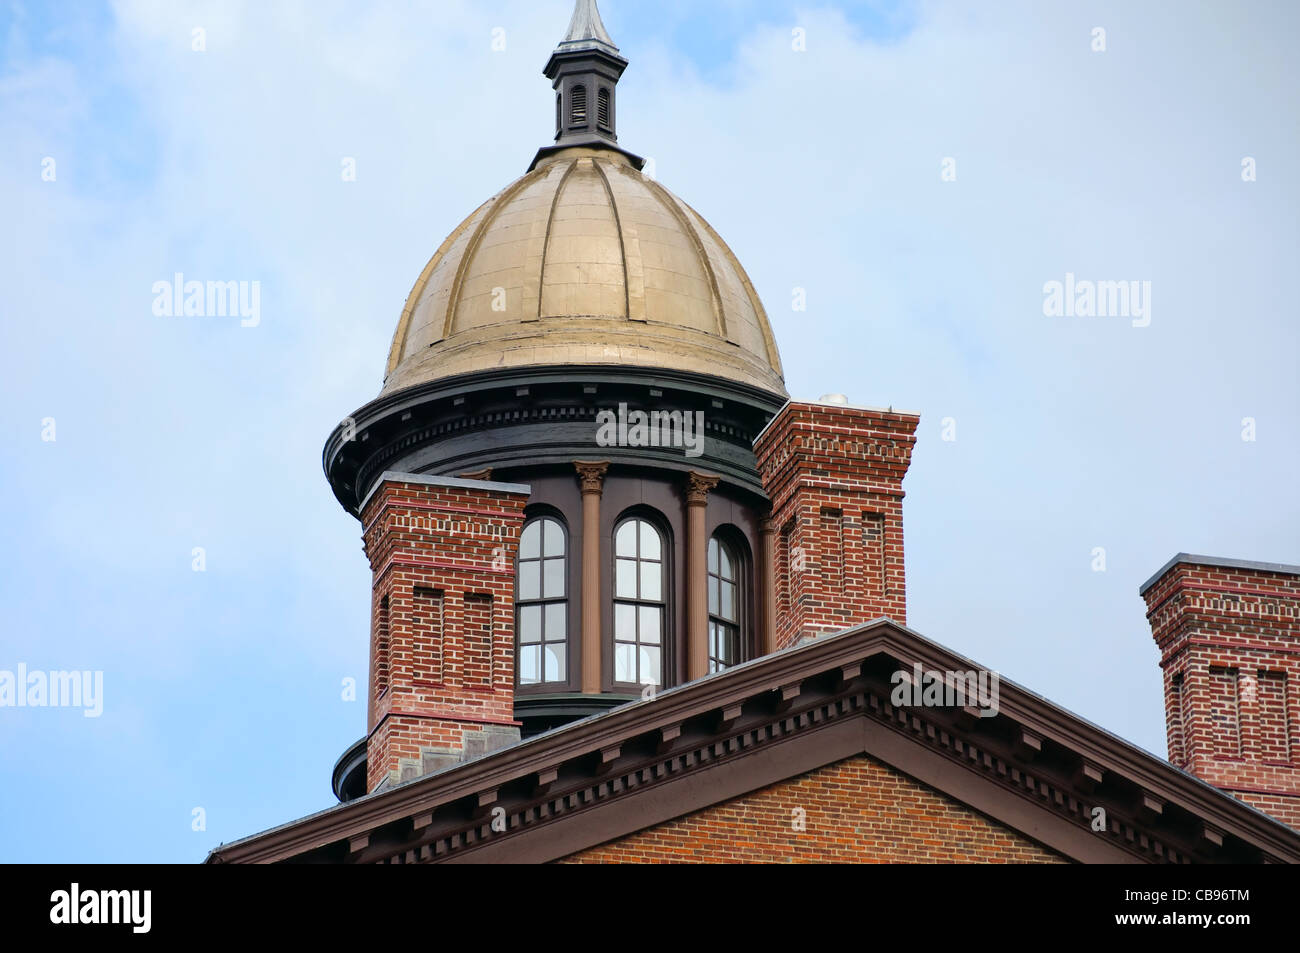 Historic Washington County Courthouse in Stillwater Minnesota built in Italianate style with dome, cupola and rooftop chimneys Stock Photo